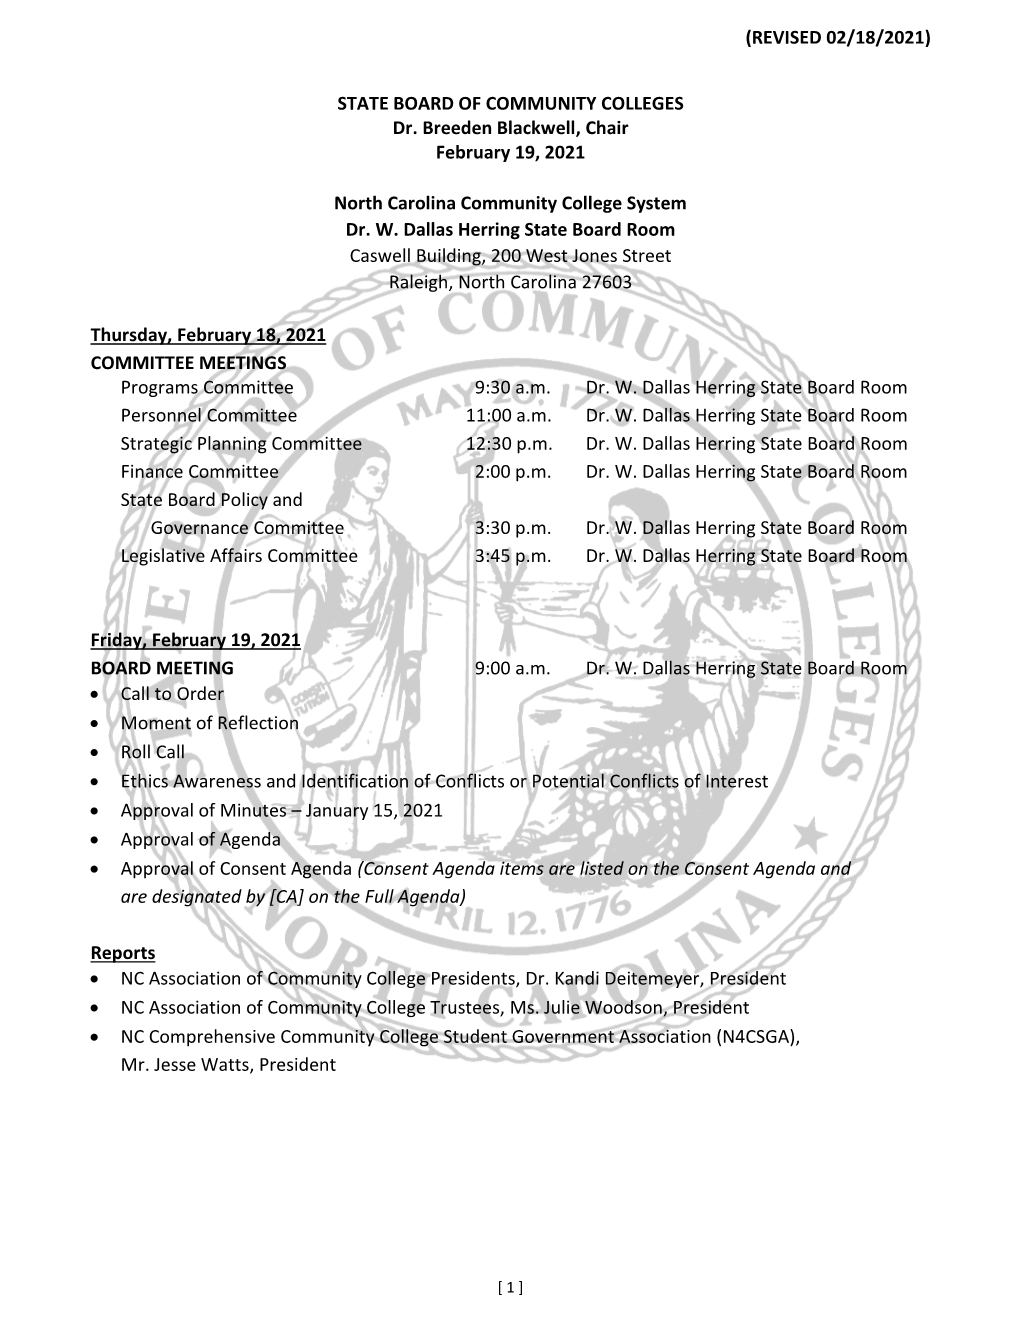 (Revised 02/18/2021) State Board of Community